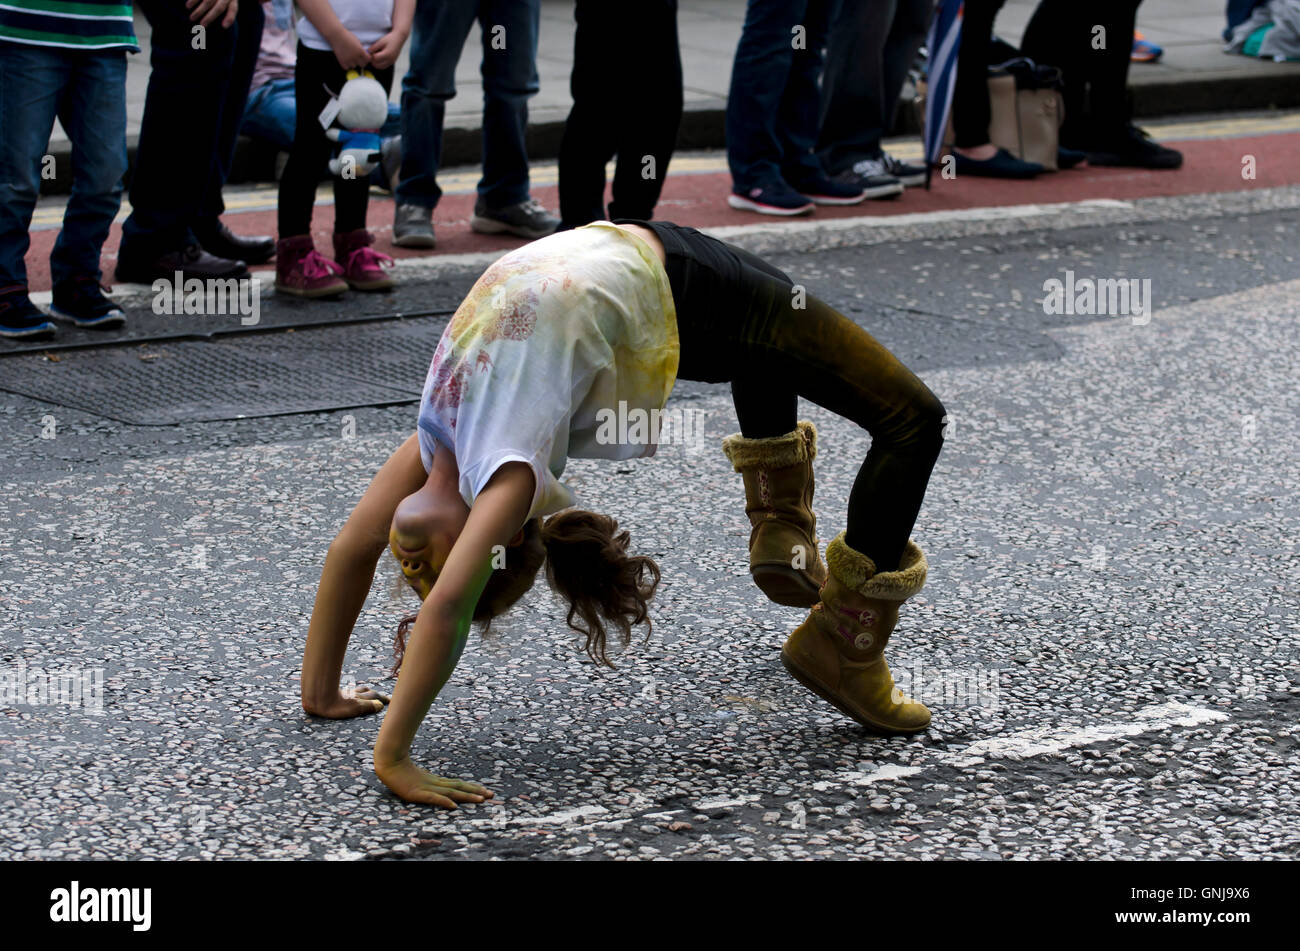 Young girl in Ugg boots bending over backwards taking part in the  Cavalcade, part of the Edinburgh Jazz Festival Stock Photo - Alamy